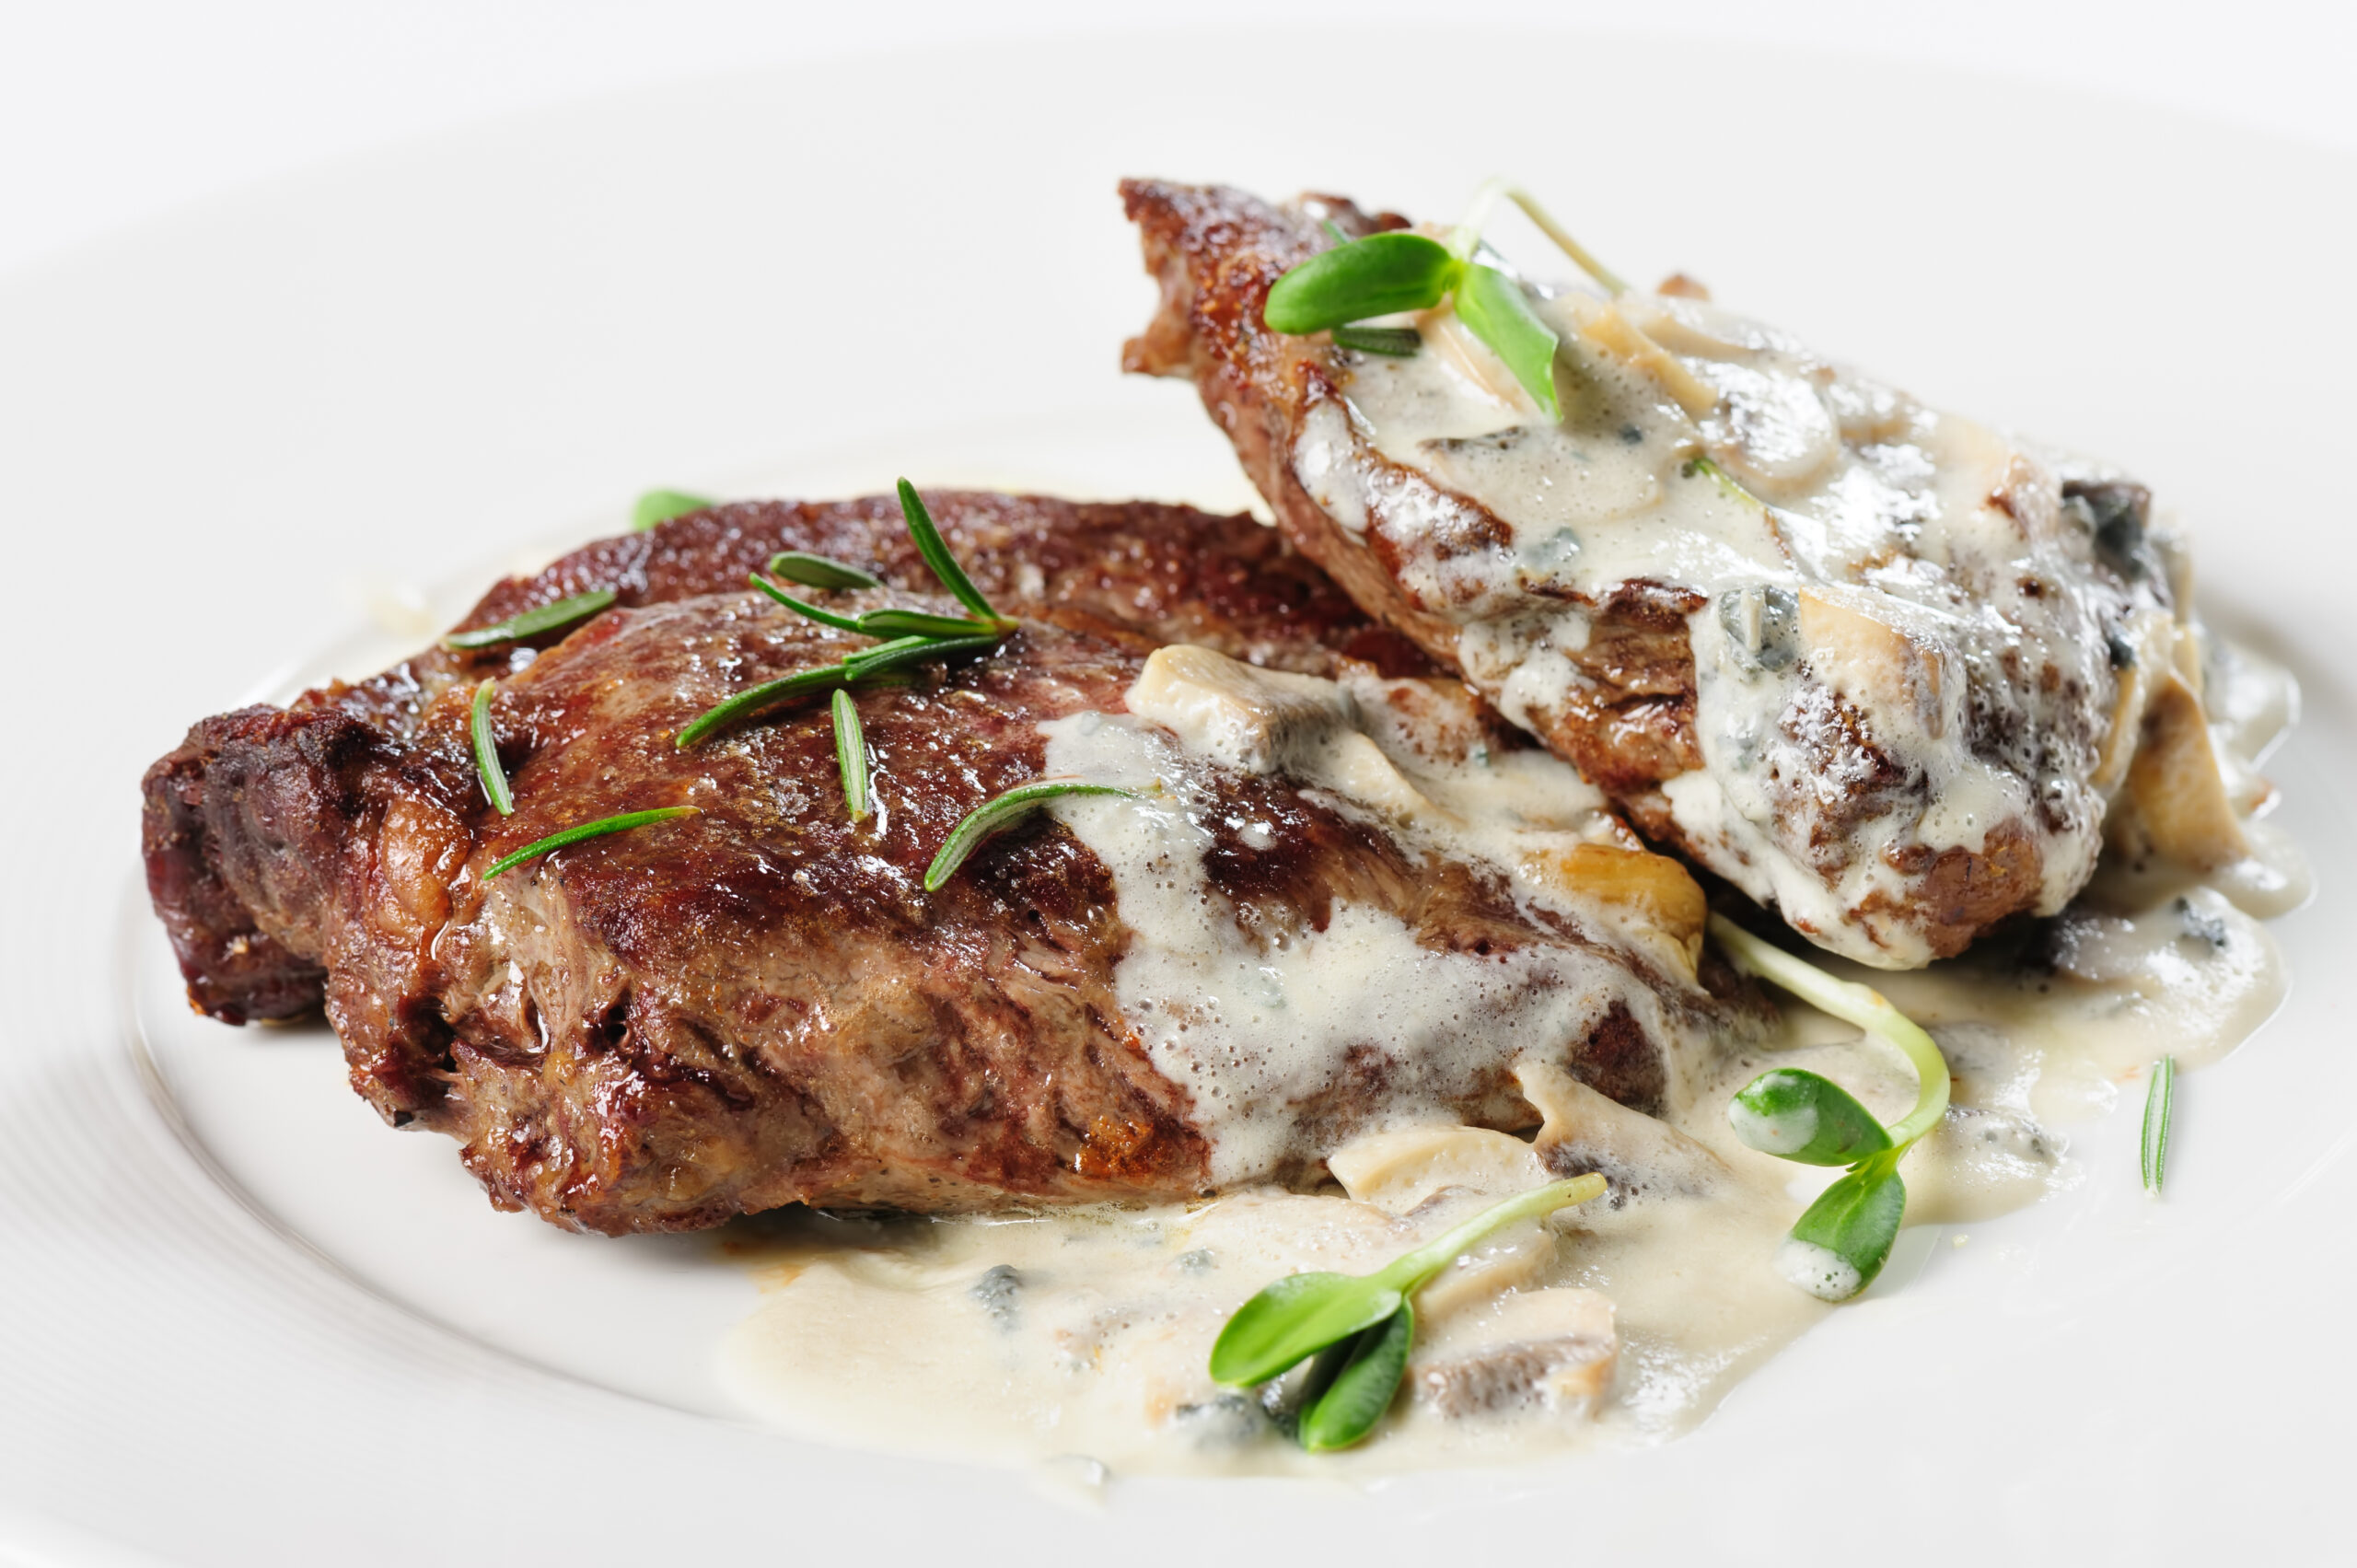 roasted beef steaks with rosemary under white sauce, served on plate